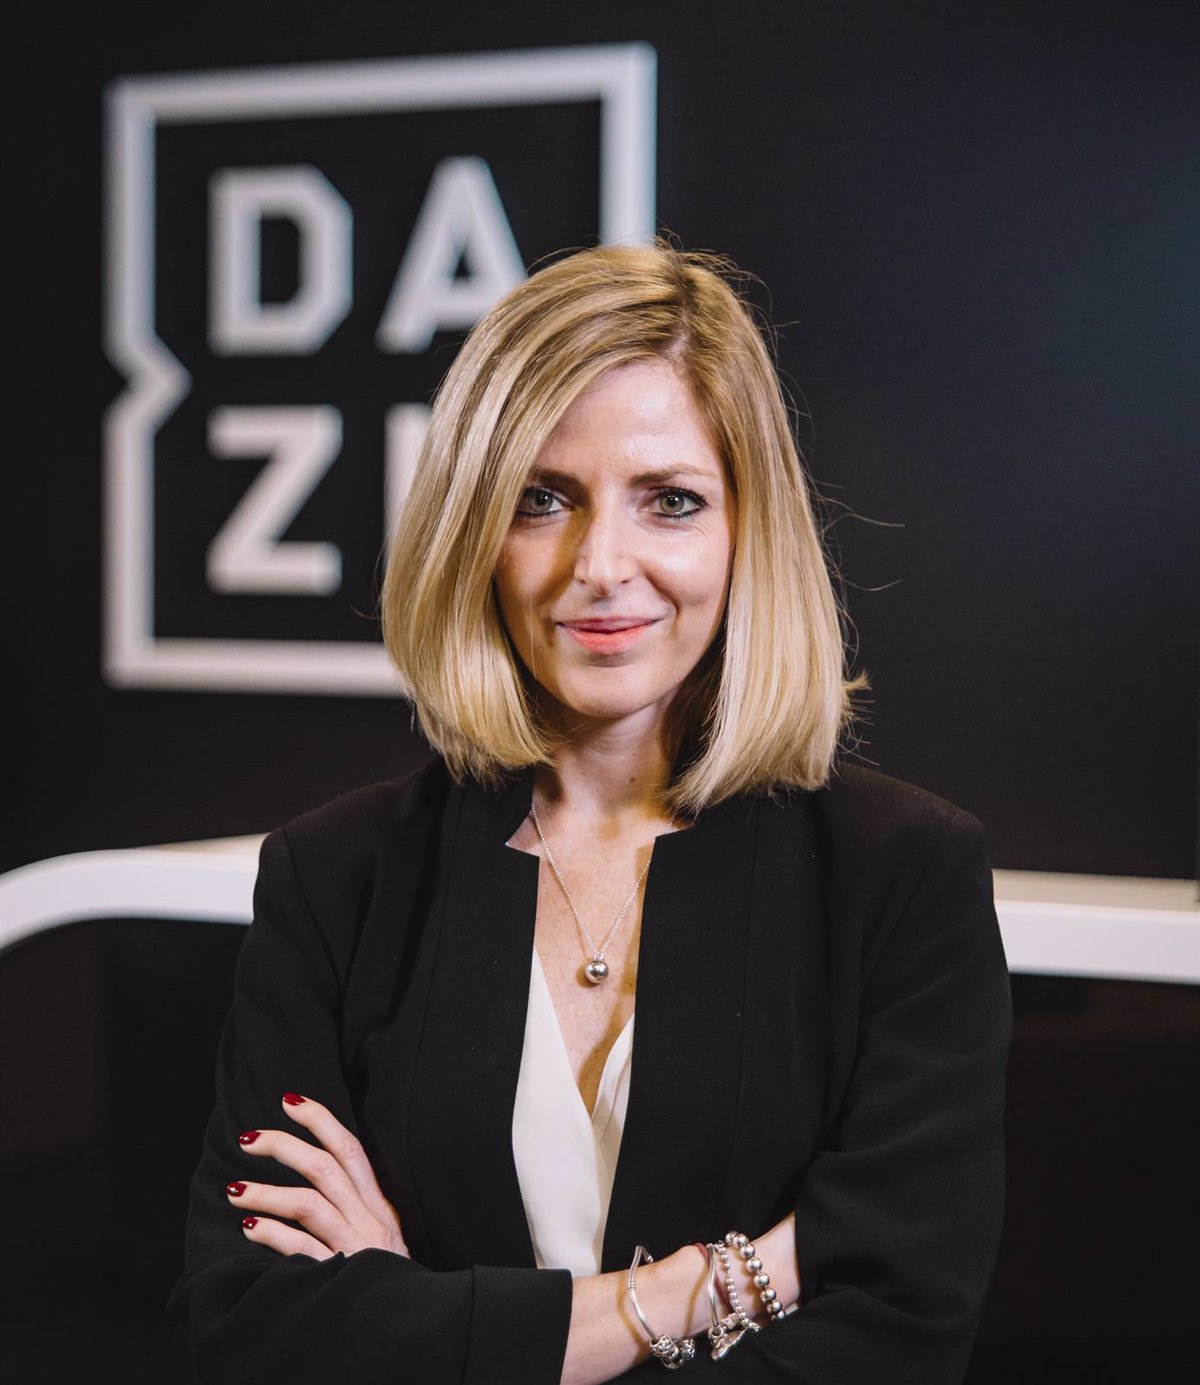 DAZN celebrates that its channel, DAZN UWCL, has made a “big push” in all women’s sports